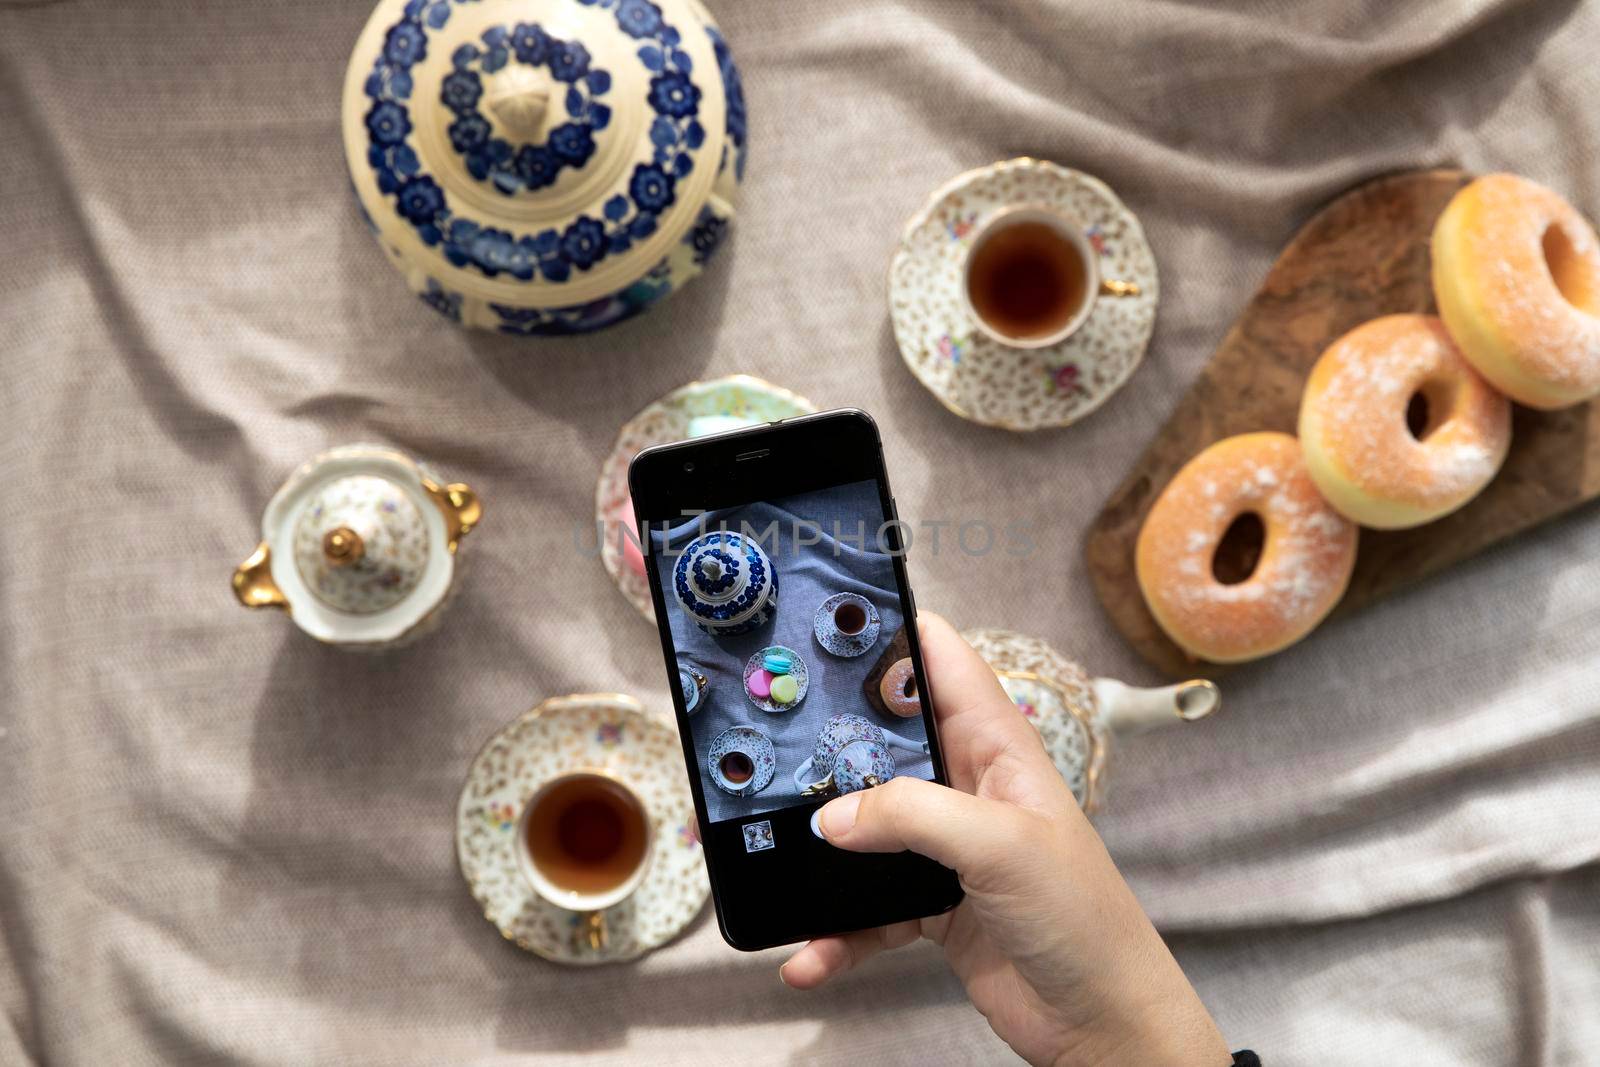 Top view picture of lady,blogger sitting in cafe and making photo with mobile of food, afternoon tea with doughnuts and macarons on the table high angle, food and social media concept by Annebel146